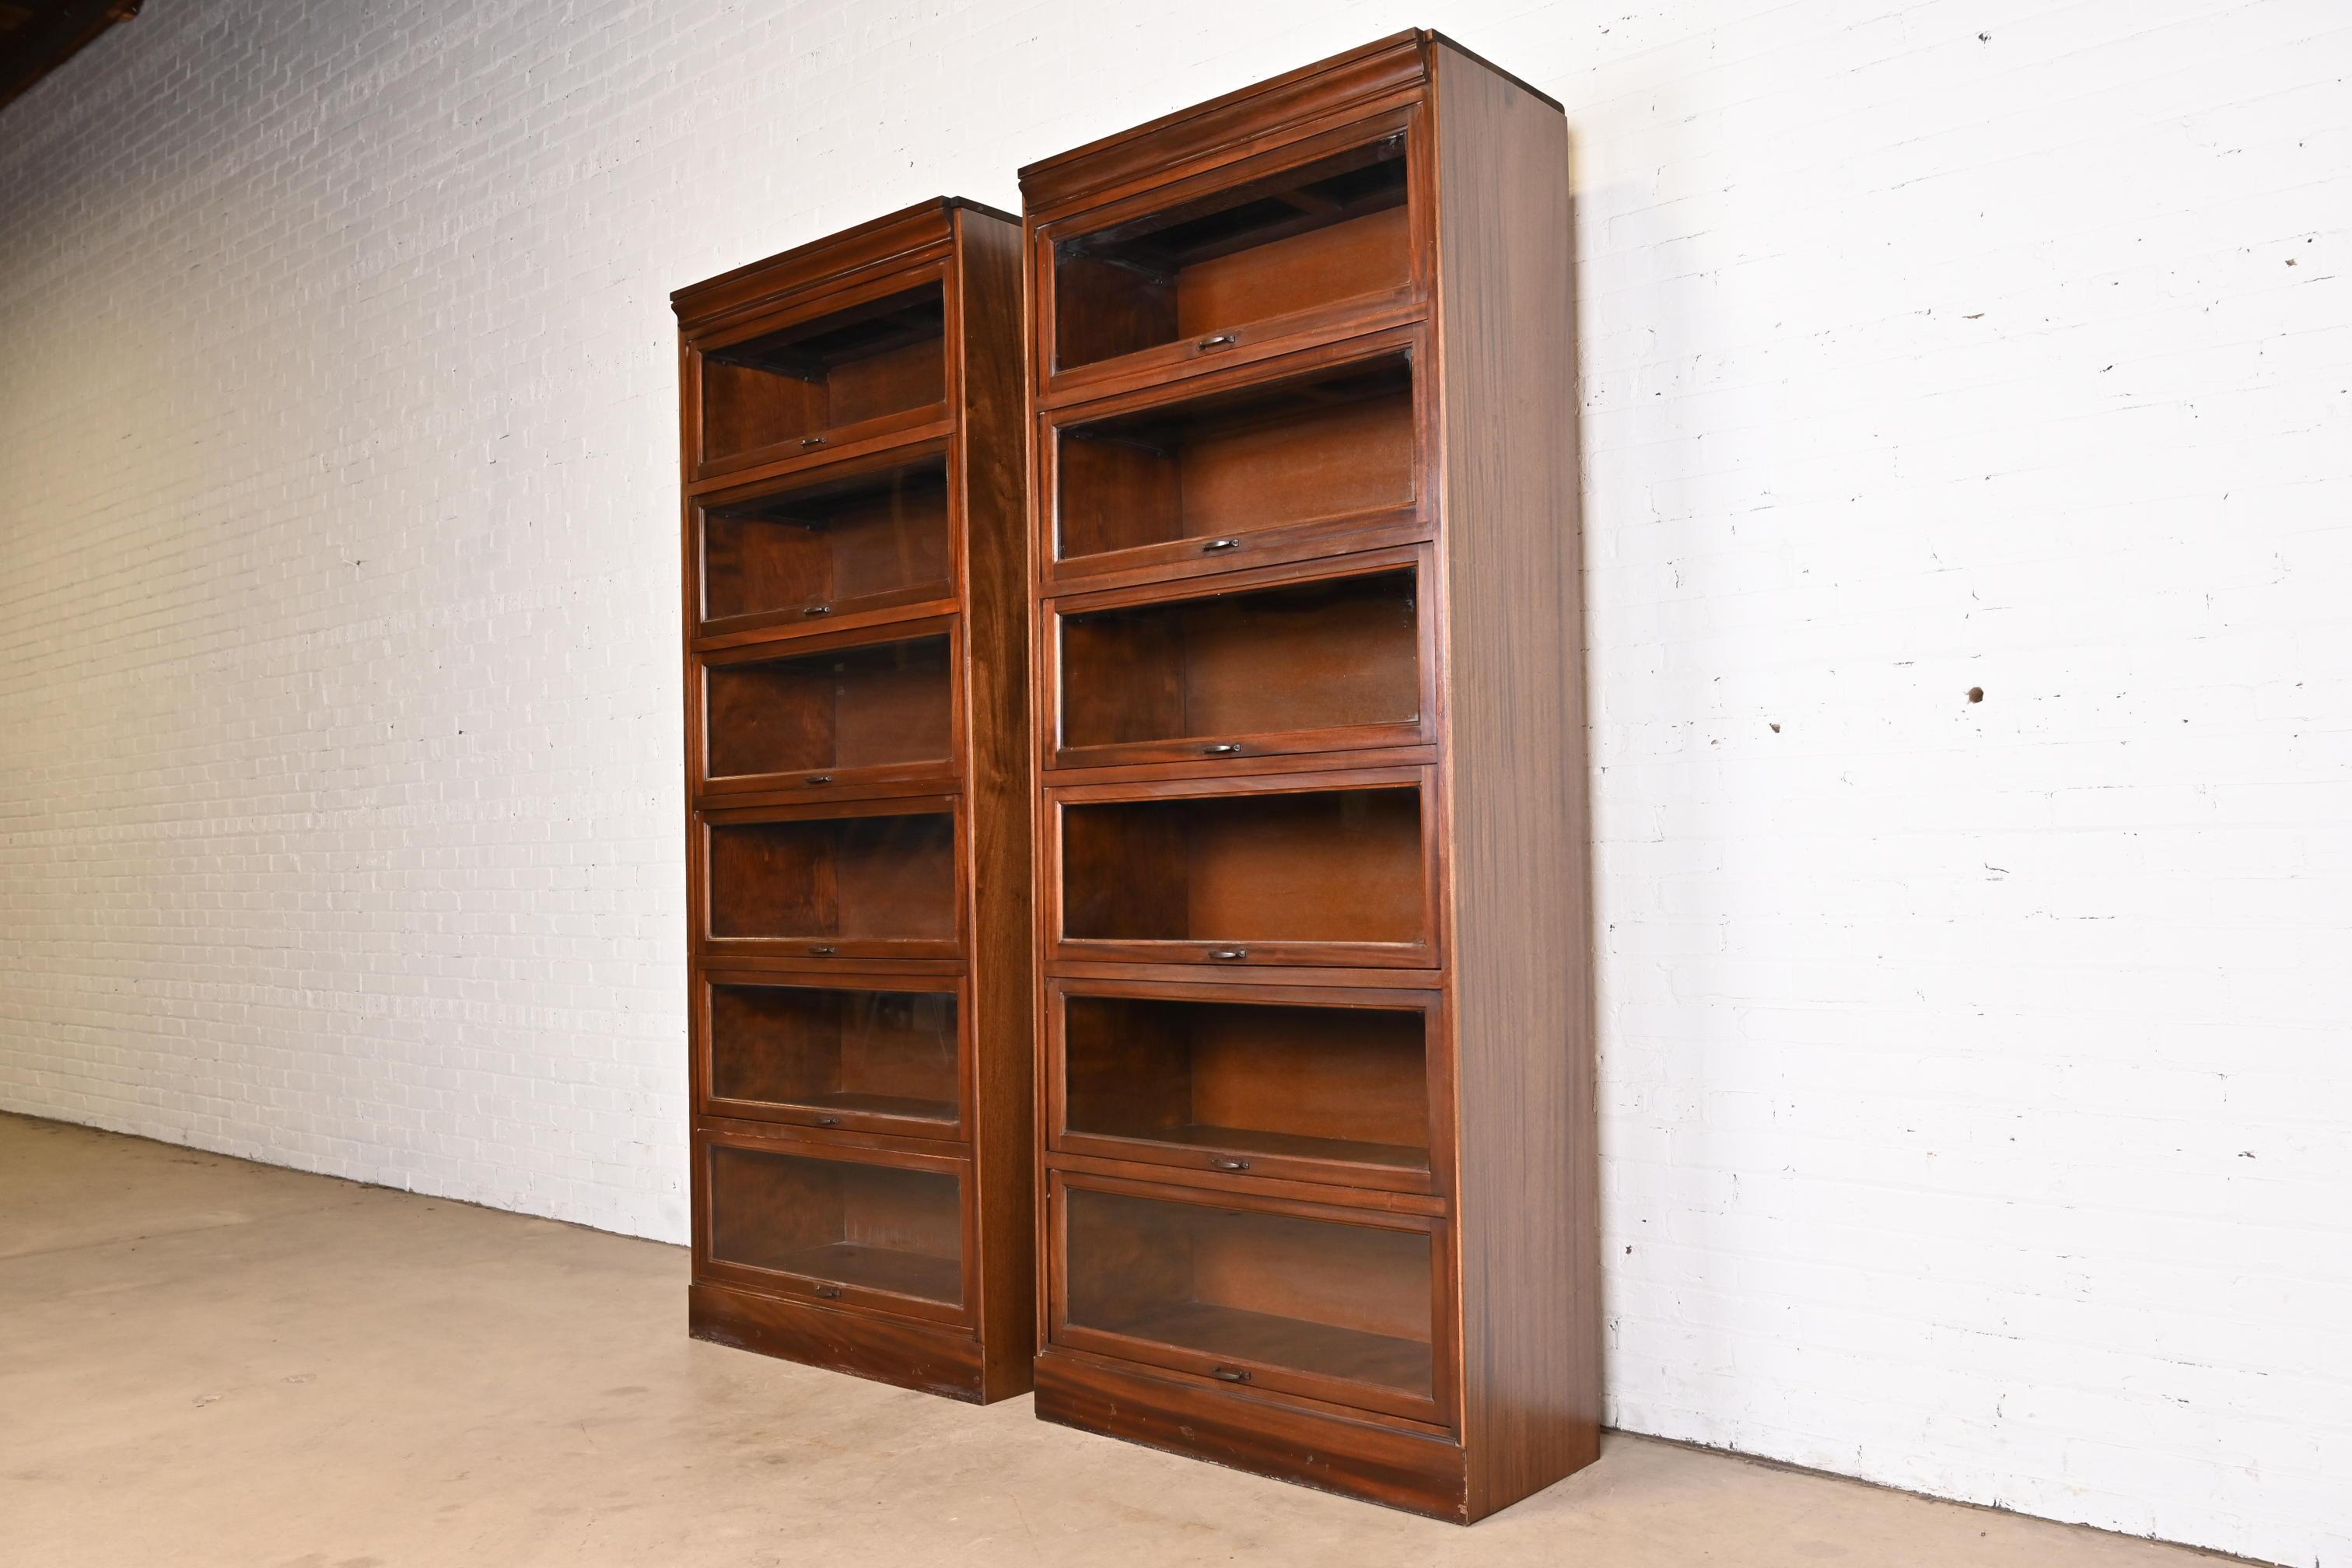 A gorgeous pair of vintage Arts & Crafts large six-stack barrister bookcases

In the manner of Globe Wernicke

USA, Mid-20th century

Mahogany, with glass front doors and brass hardware.

Measures: 36